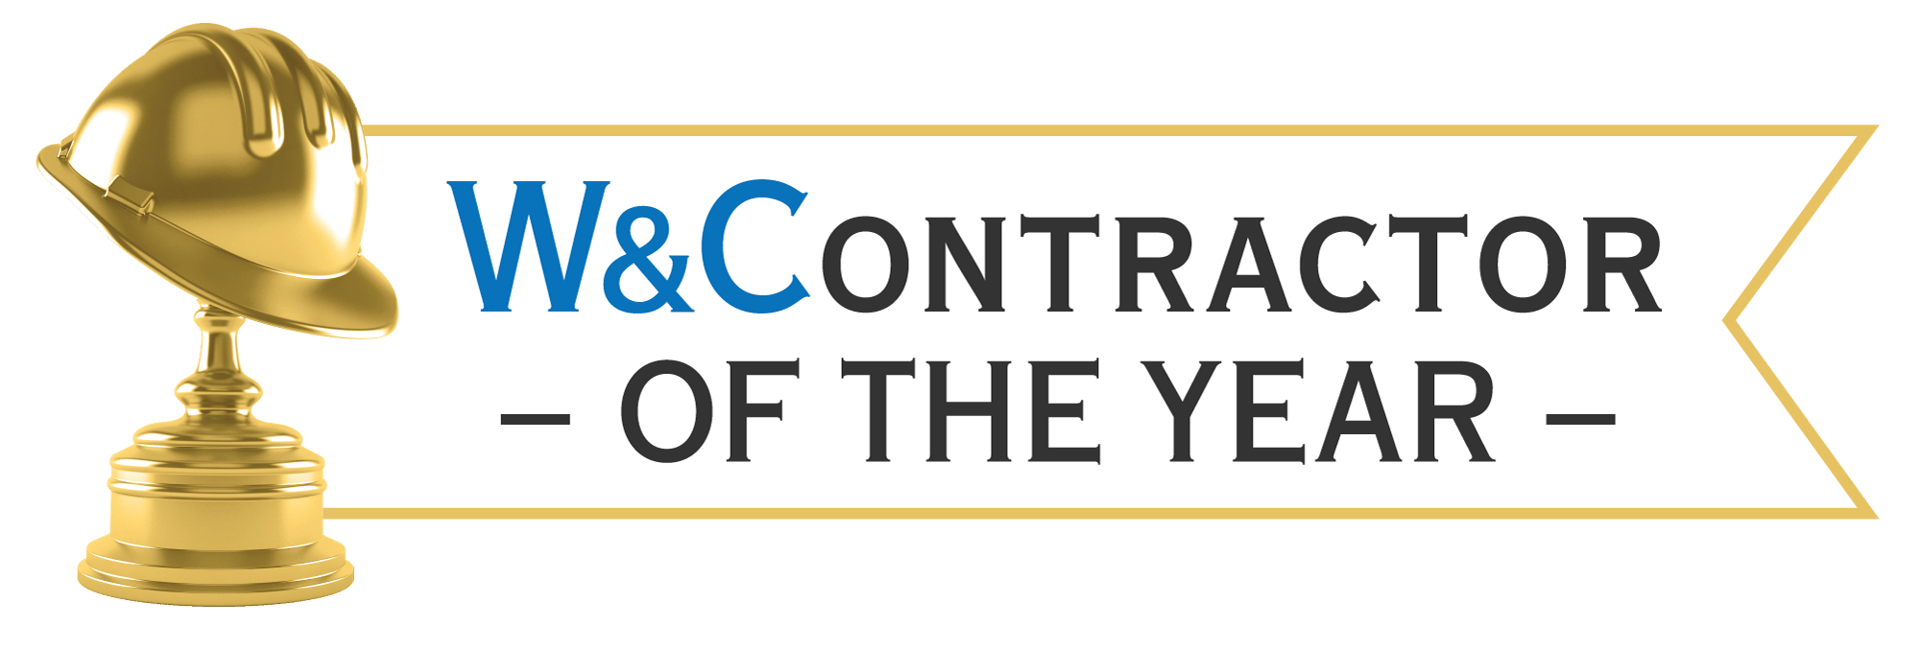 W&#x26;Contractor of the Year